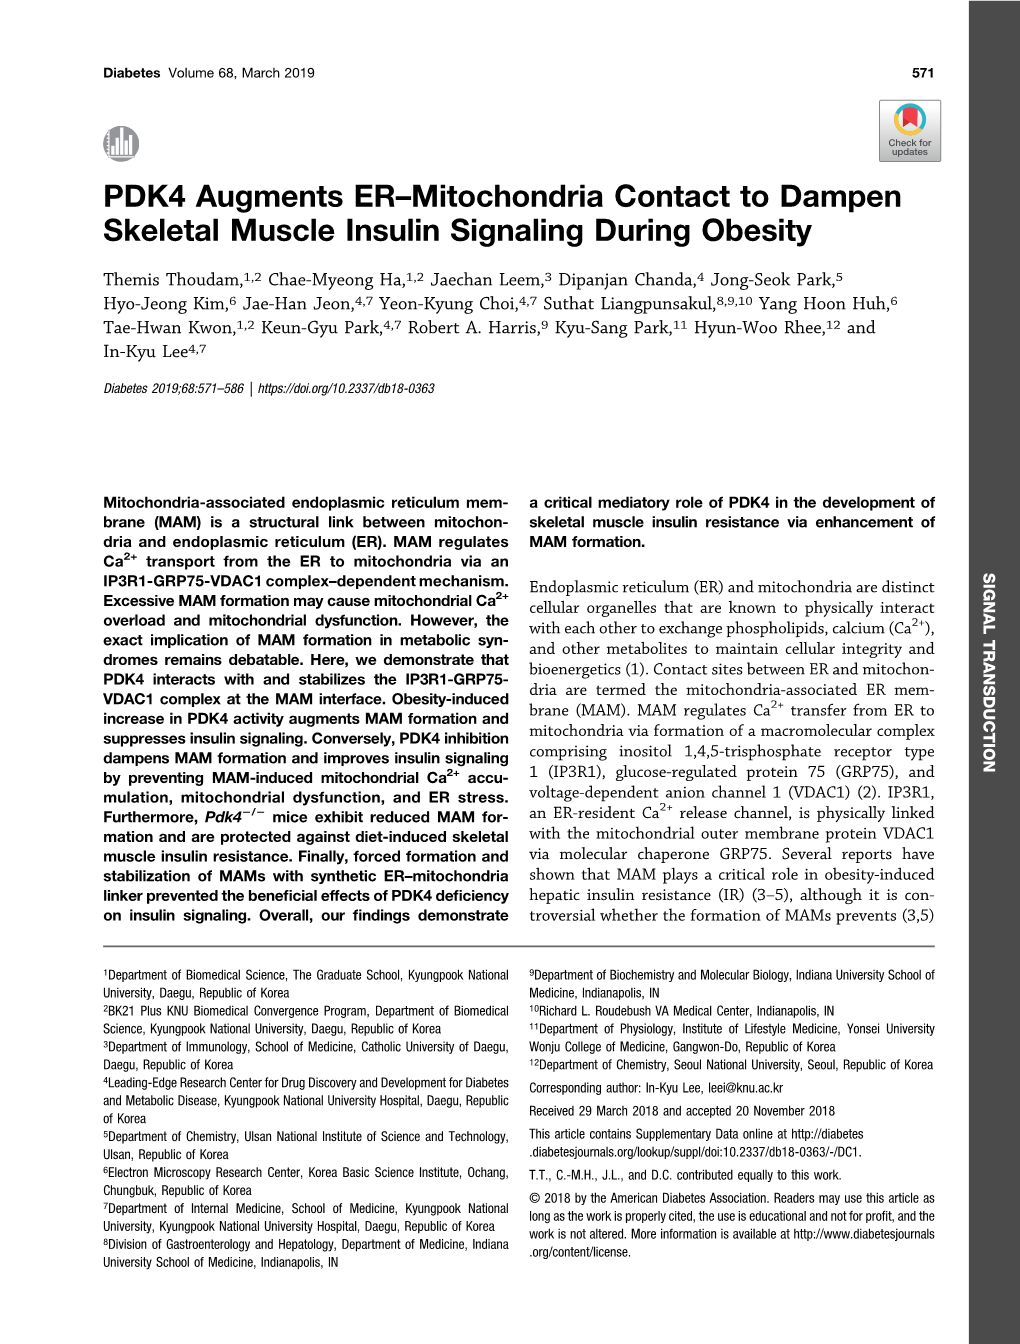 PDK4 Augments ER–Mitochondria Contact to Dampen Skeletal Muscle Insulin Signaling During Obesity